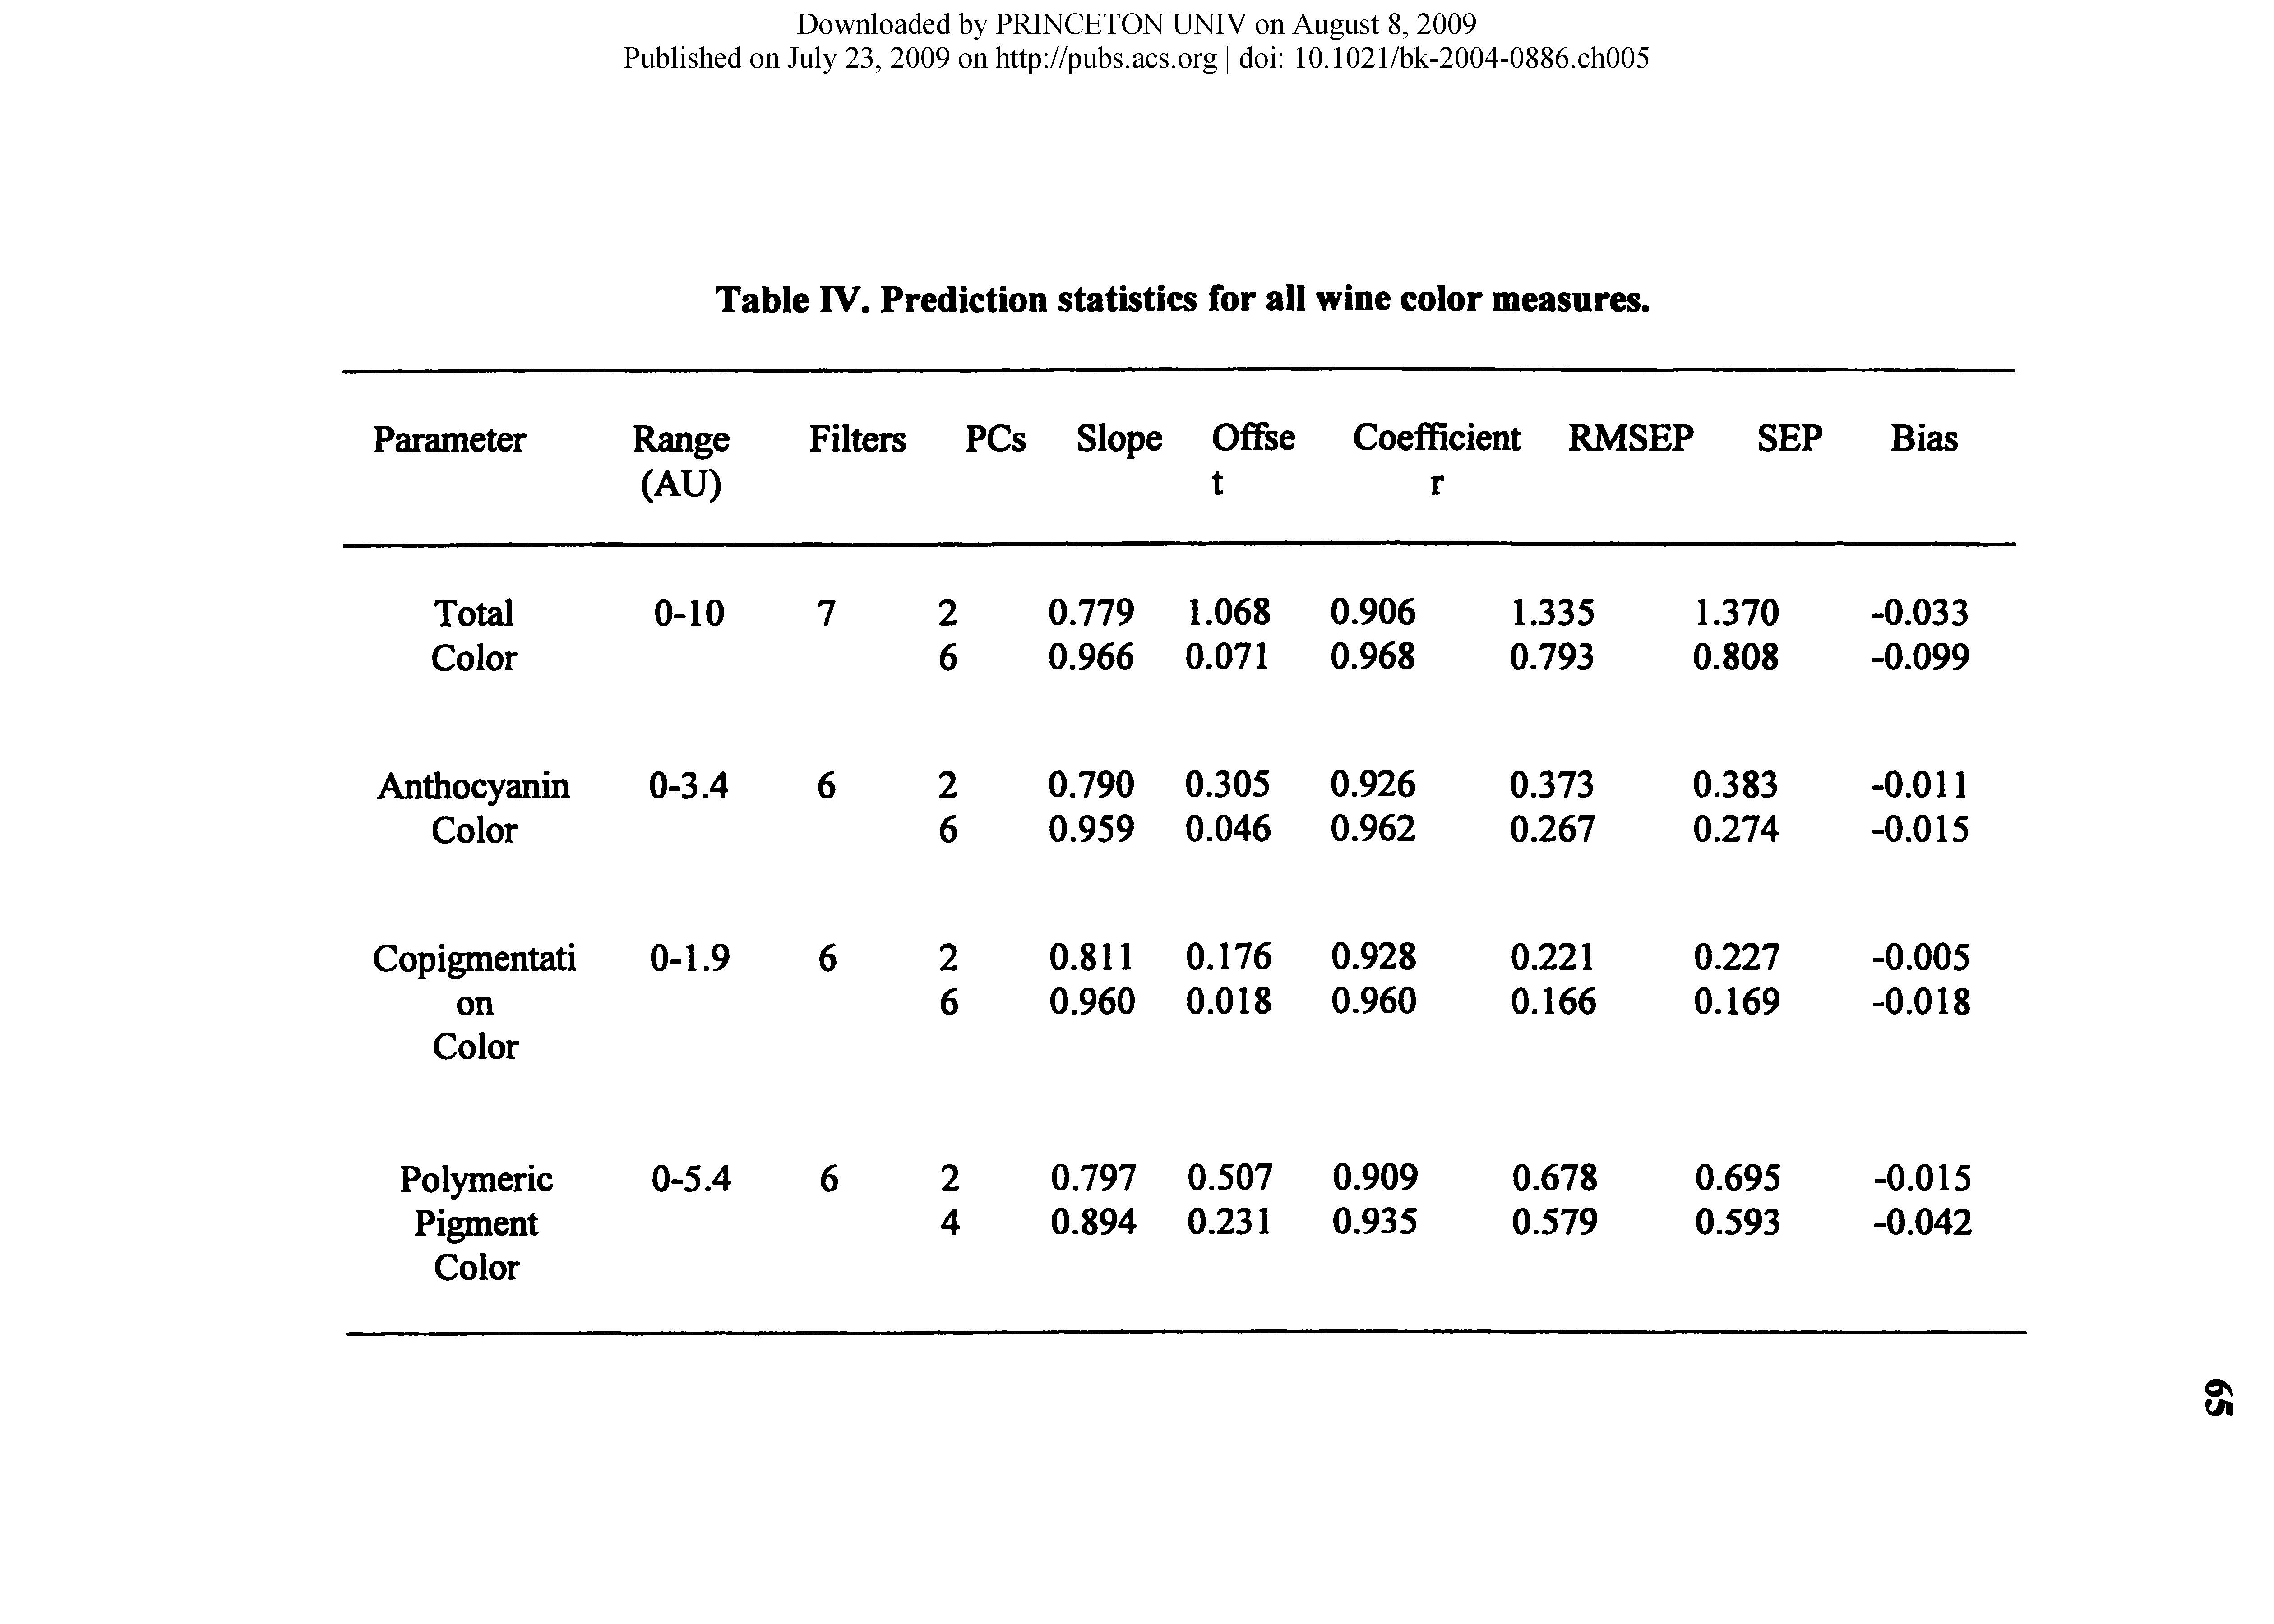 Table IV. Prediction statistics for all wine color measures.